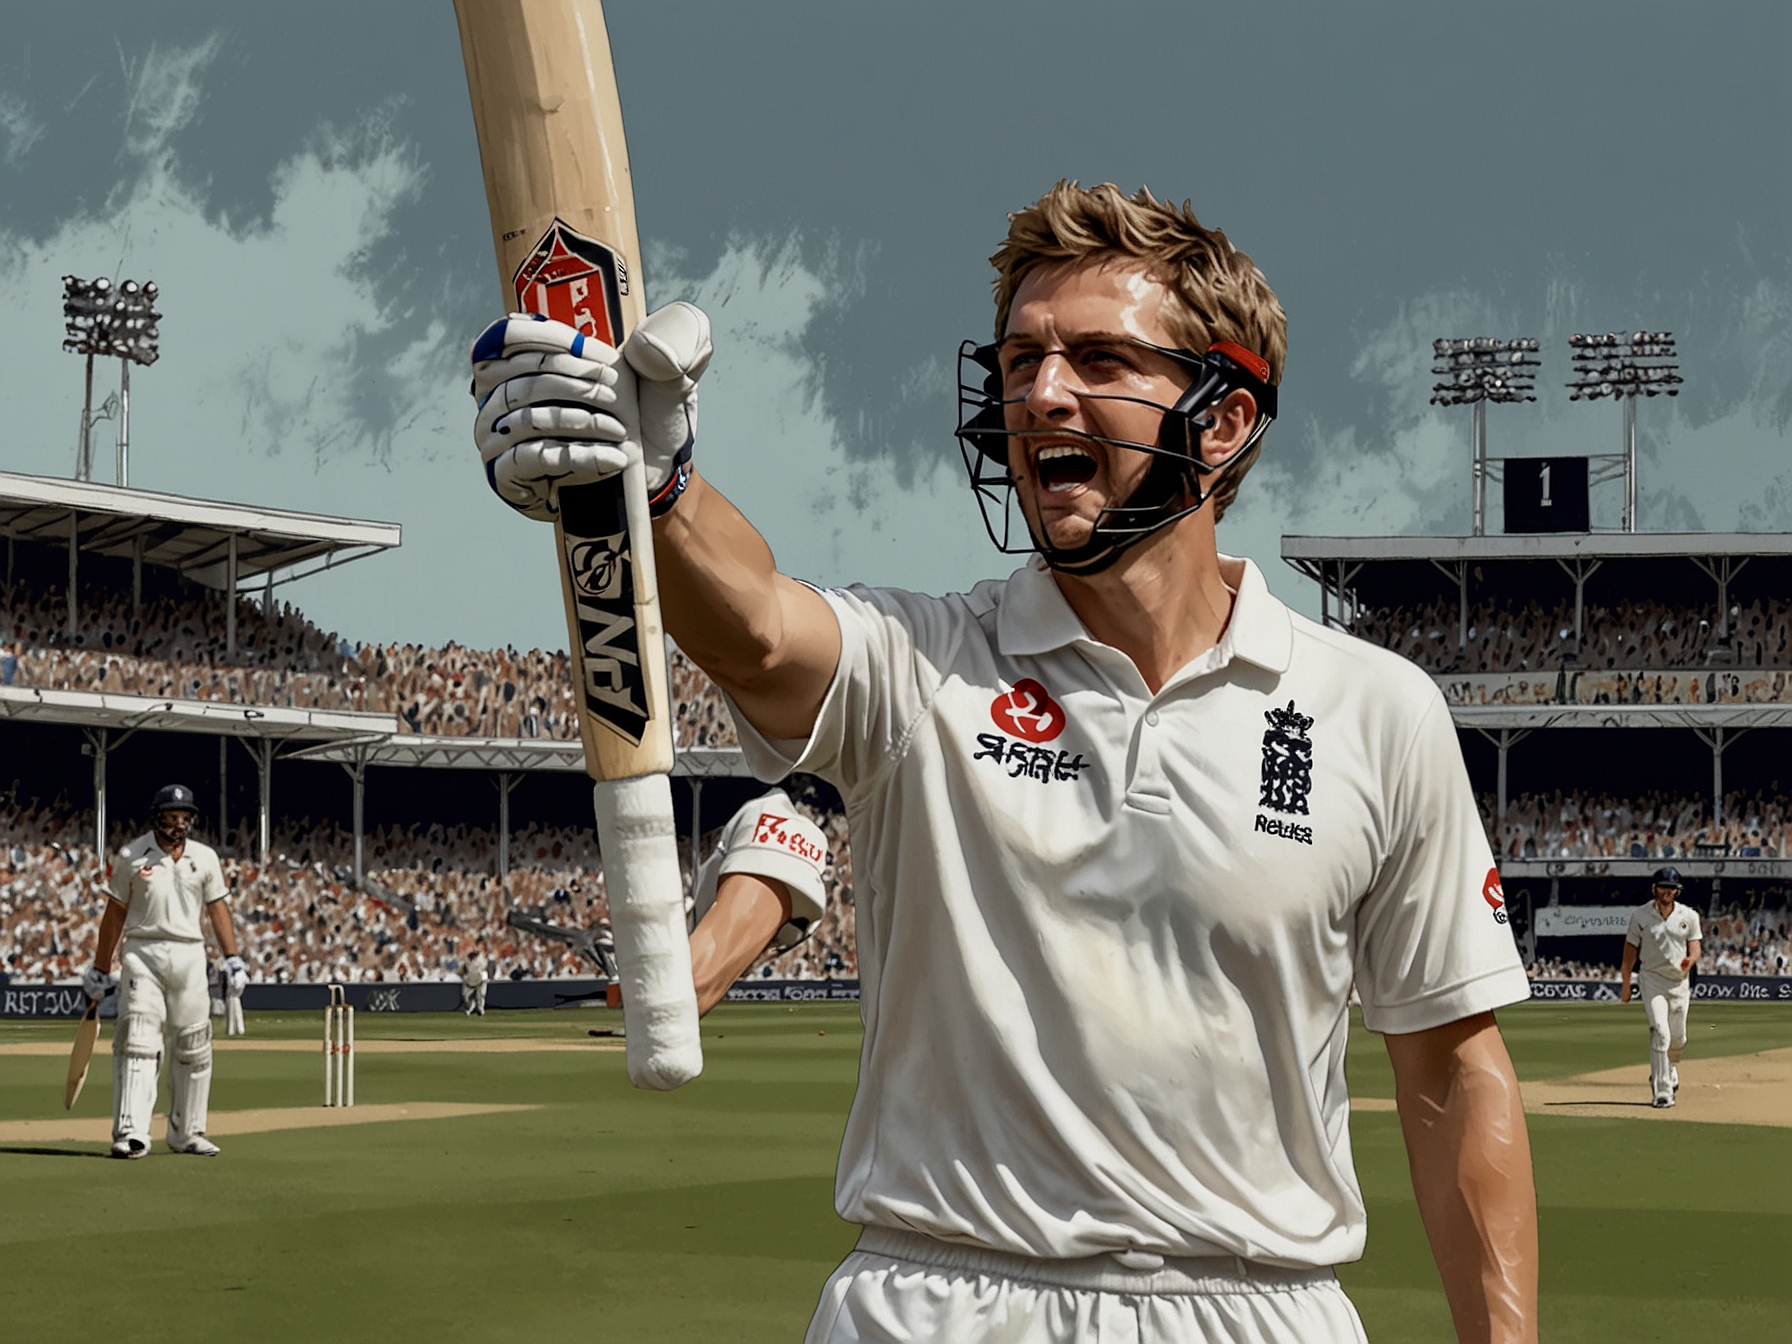 England's Joe Root on the field, guiding his team with stellar batting performance. The background shows spectators cheering, highlighting the high-stakes nature of the Super 8 stage.